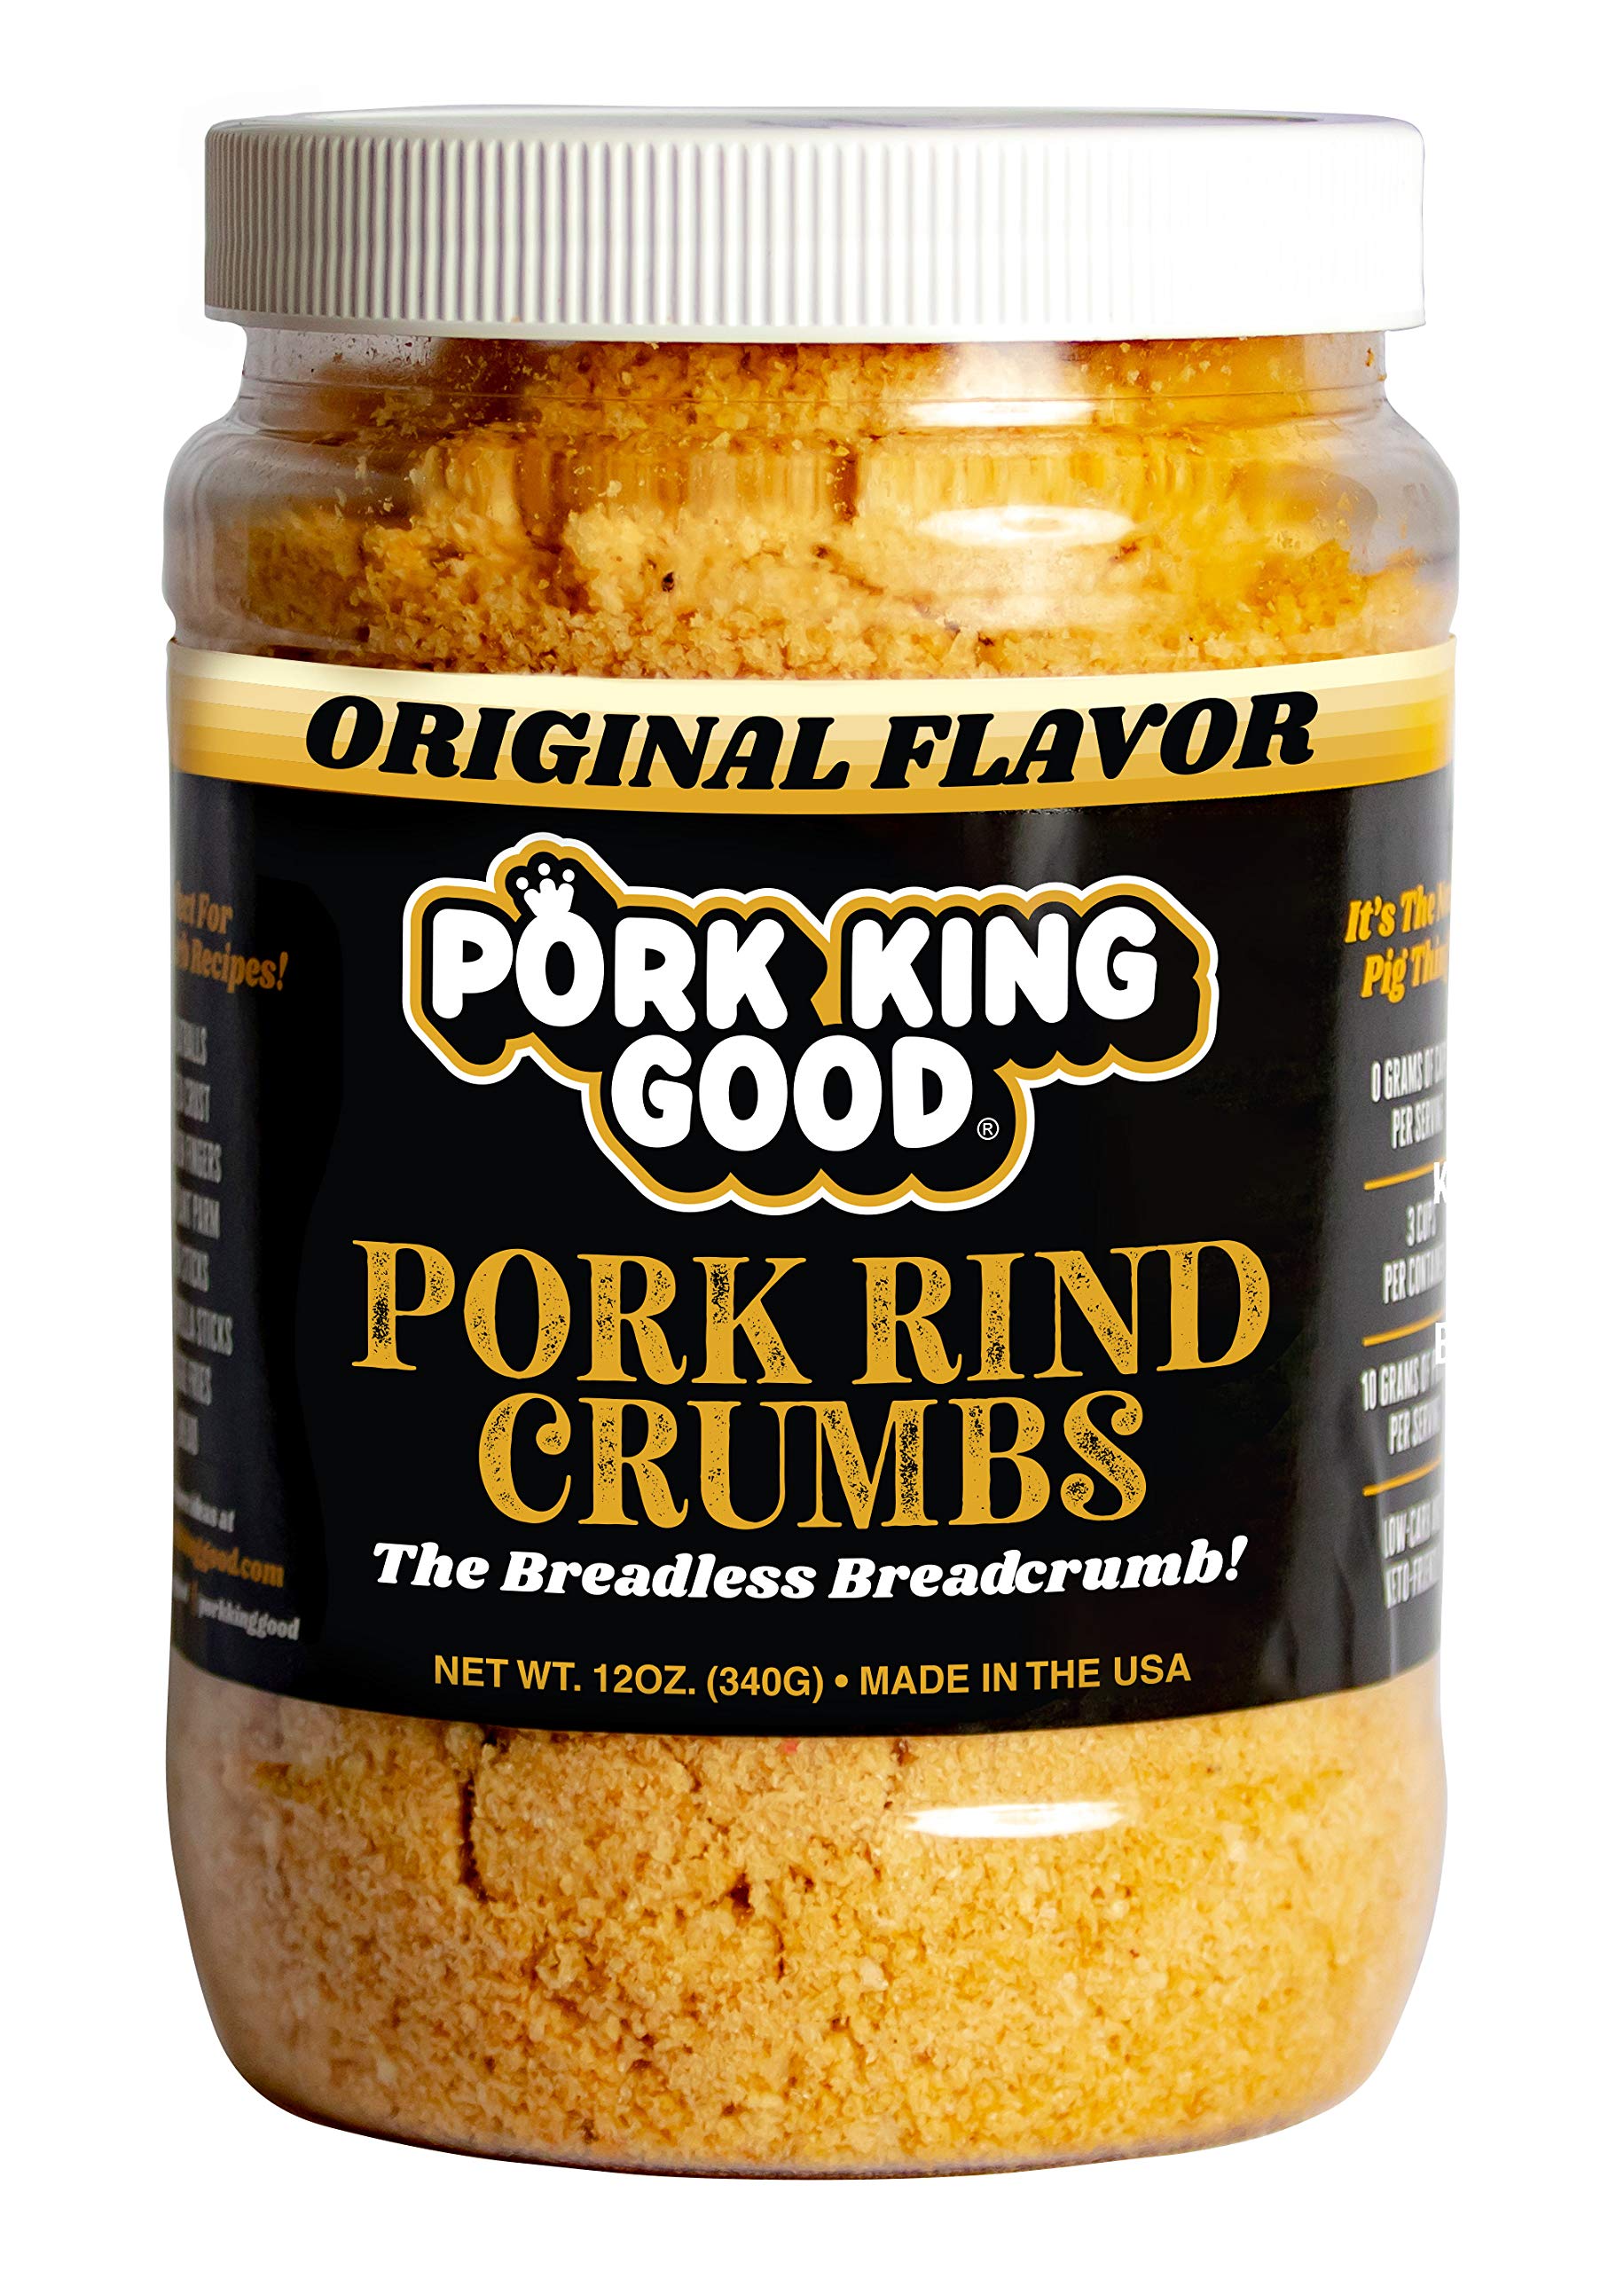 container of breadcrumbs from Pork King